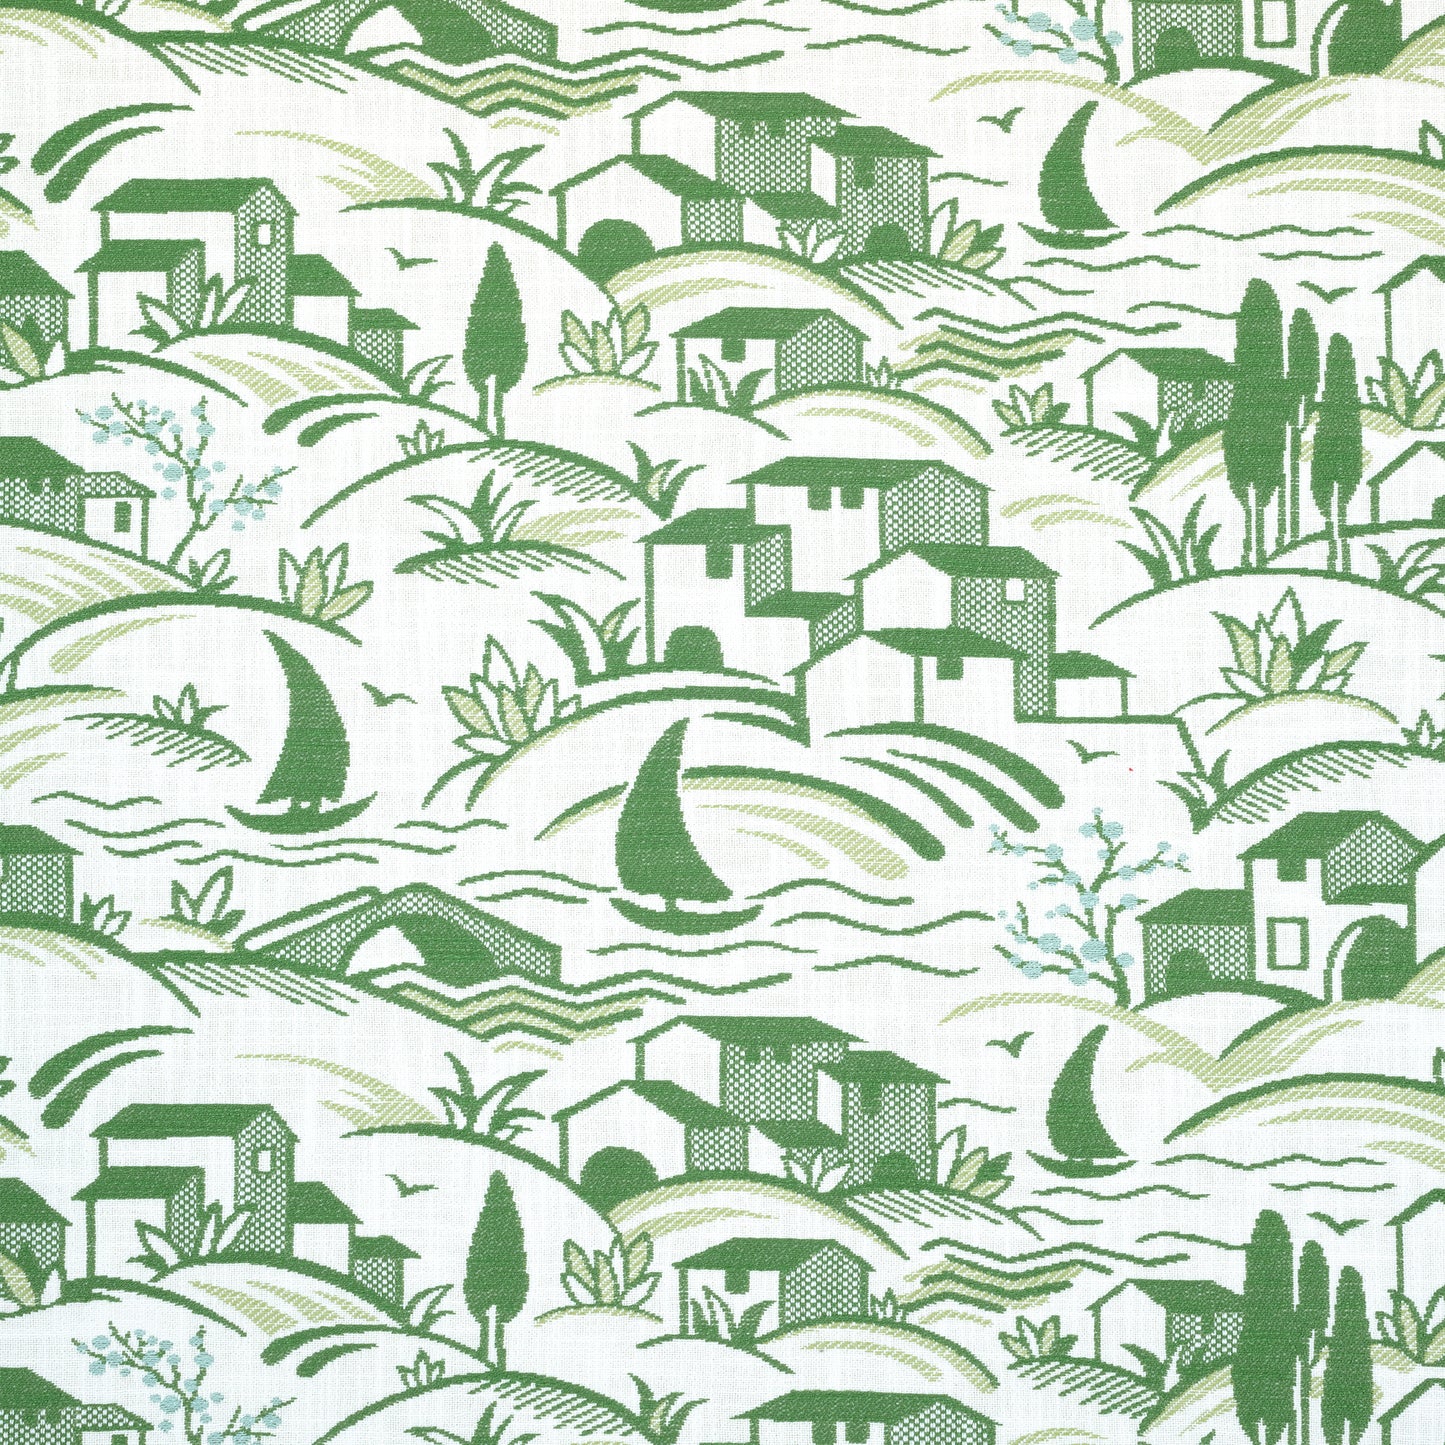 Purchase Thibaut Fabric Item W73521 pattern name Landmark color Seafoam and Kelly Green